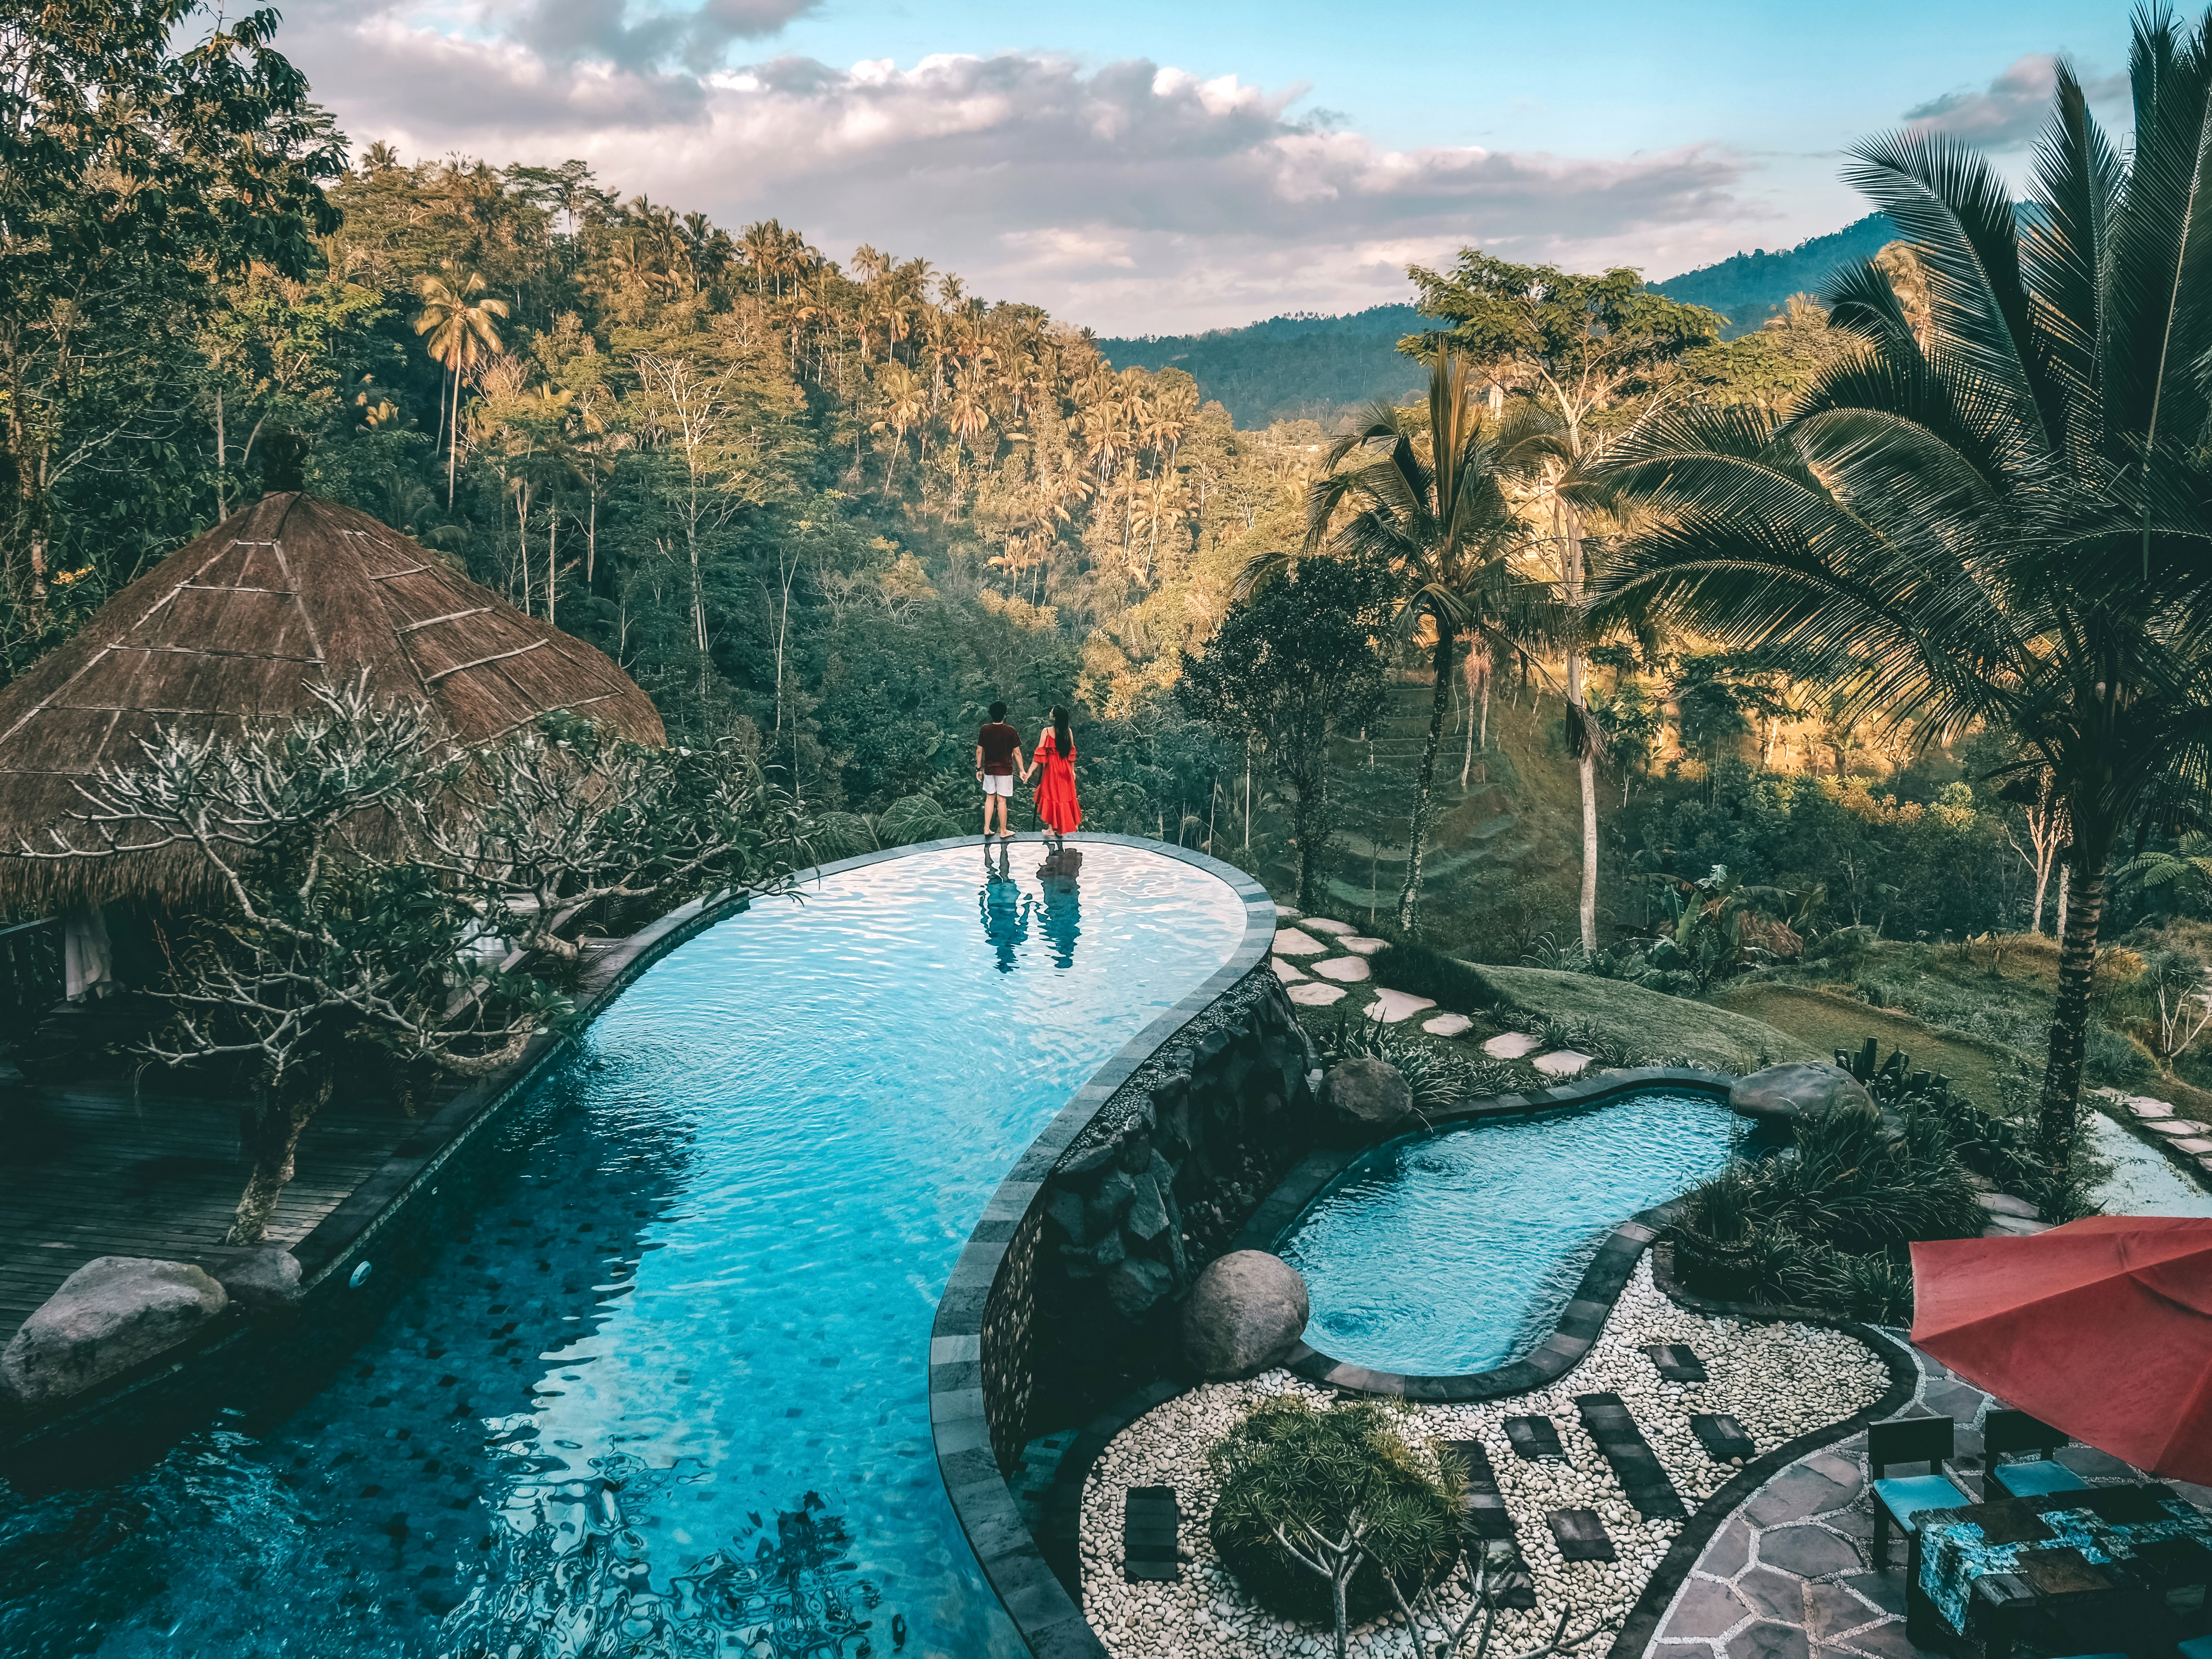 Bali Ubud with two people stnading at the edge of an infinity pool overlooking the green lush terraces